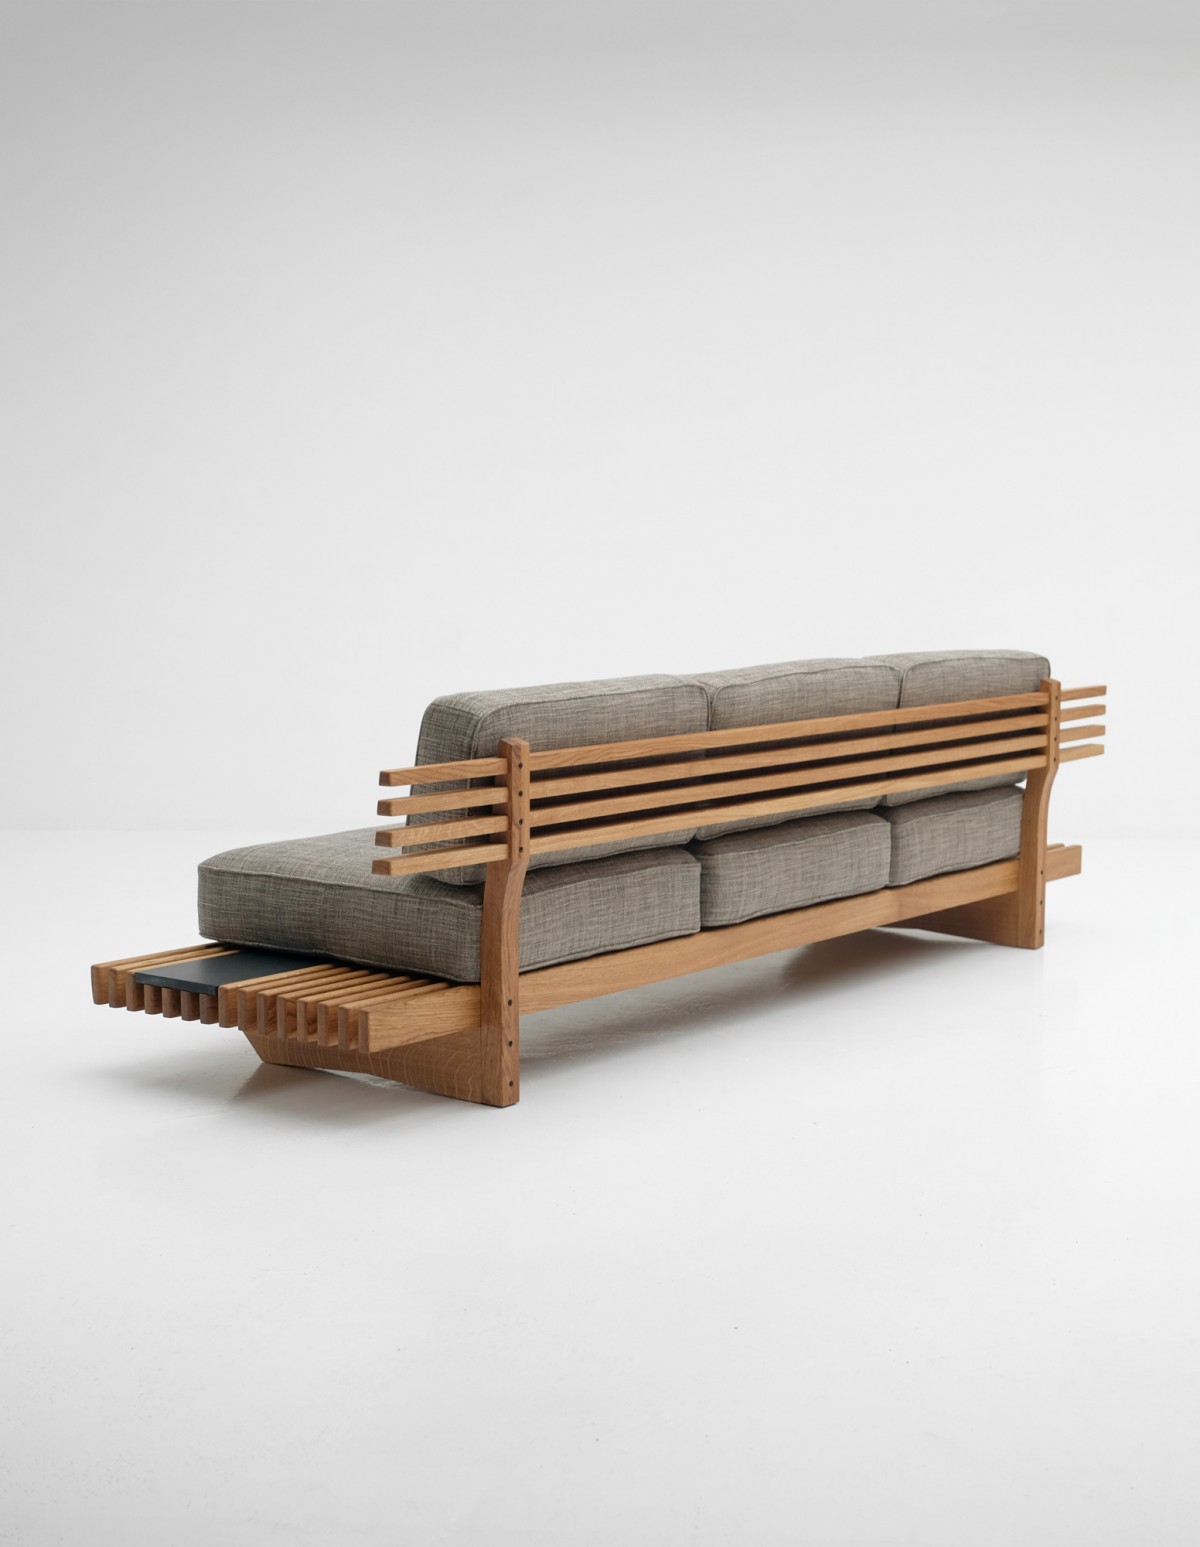 Japanese Bench by Alexandre Lowie